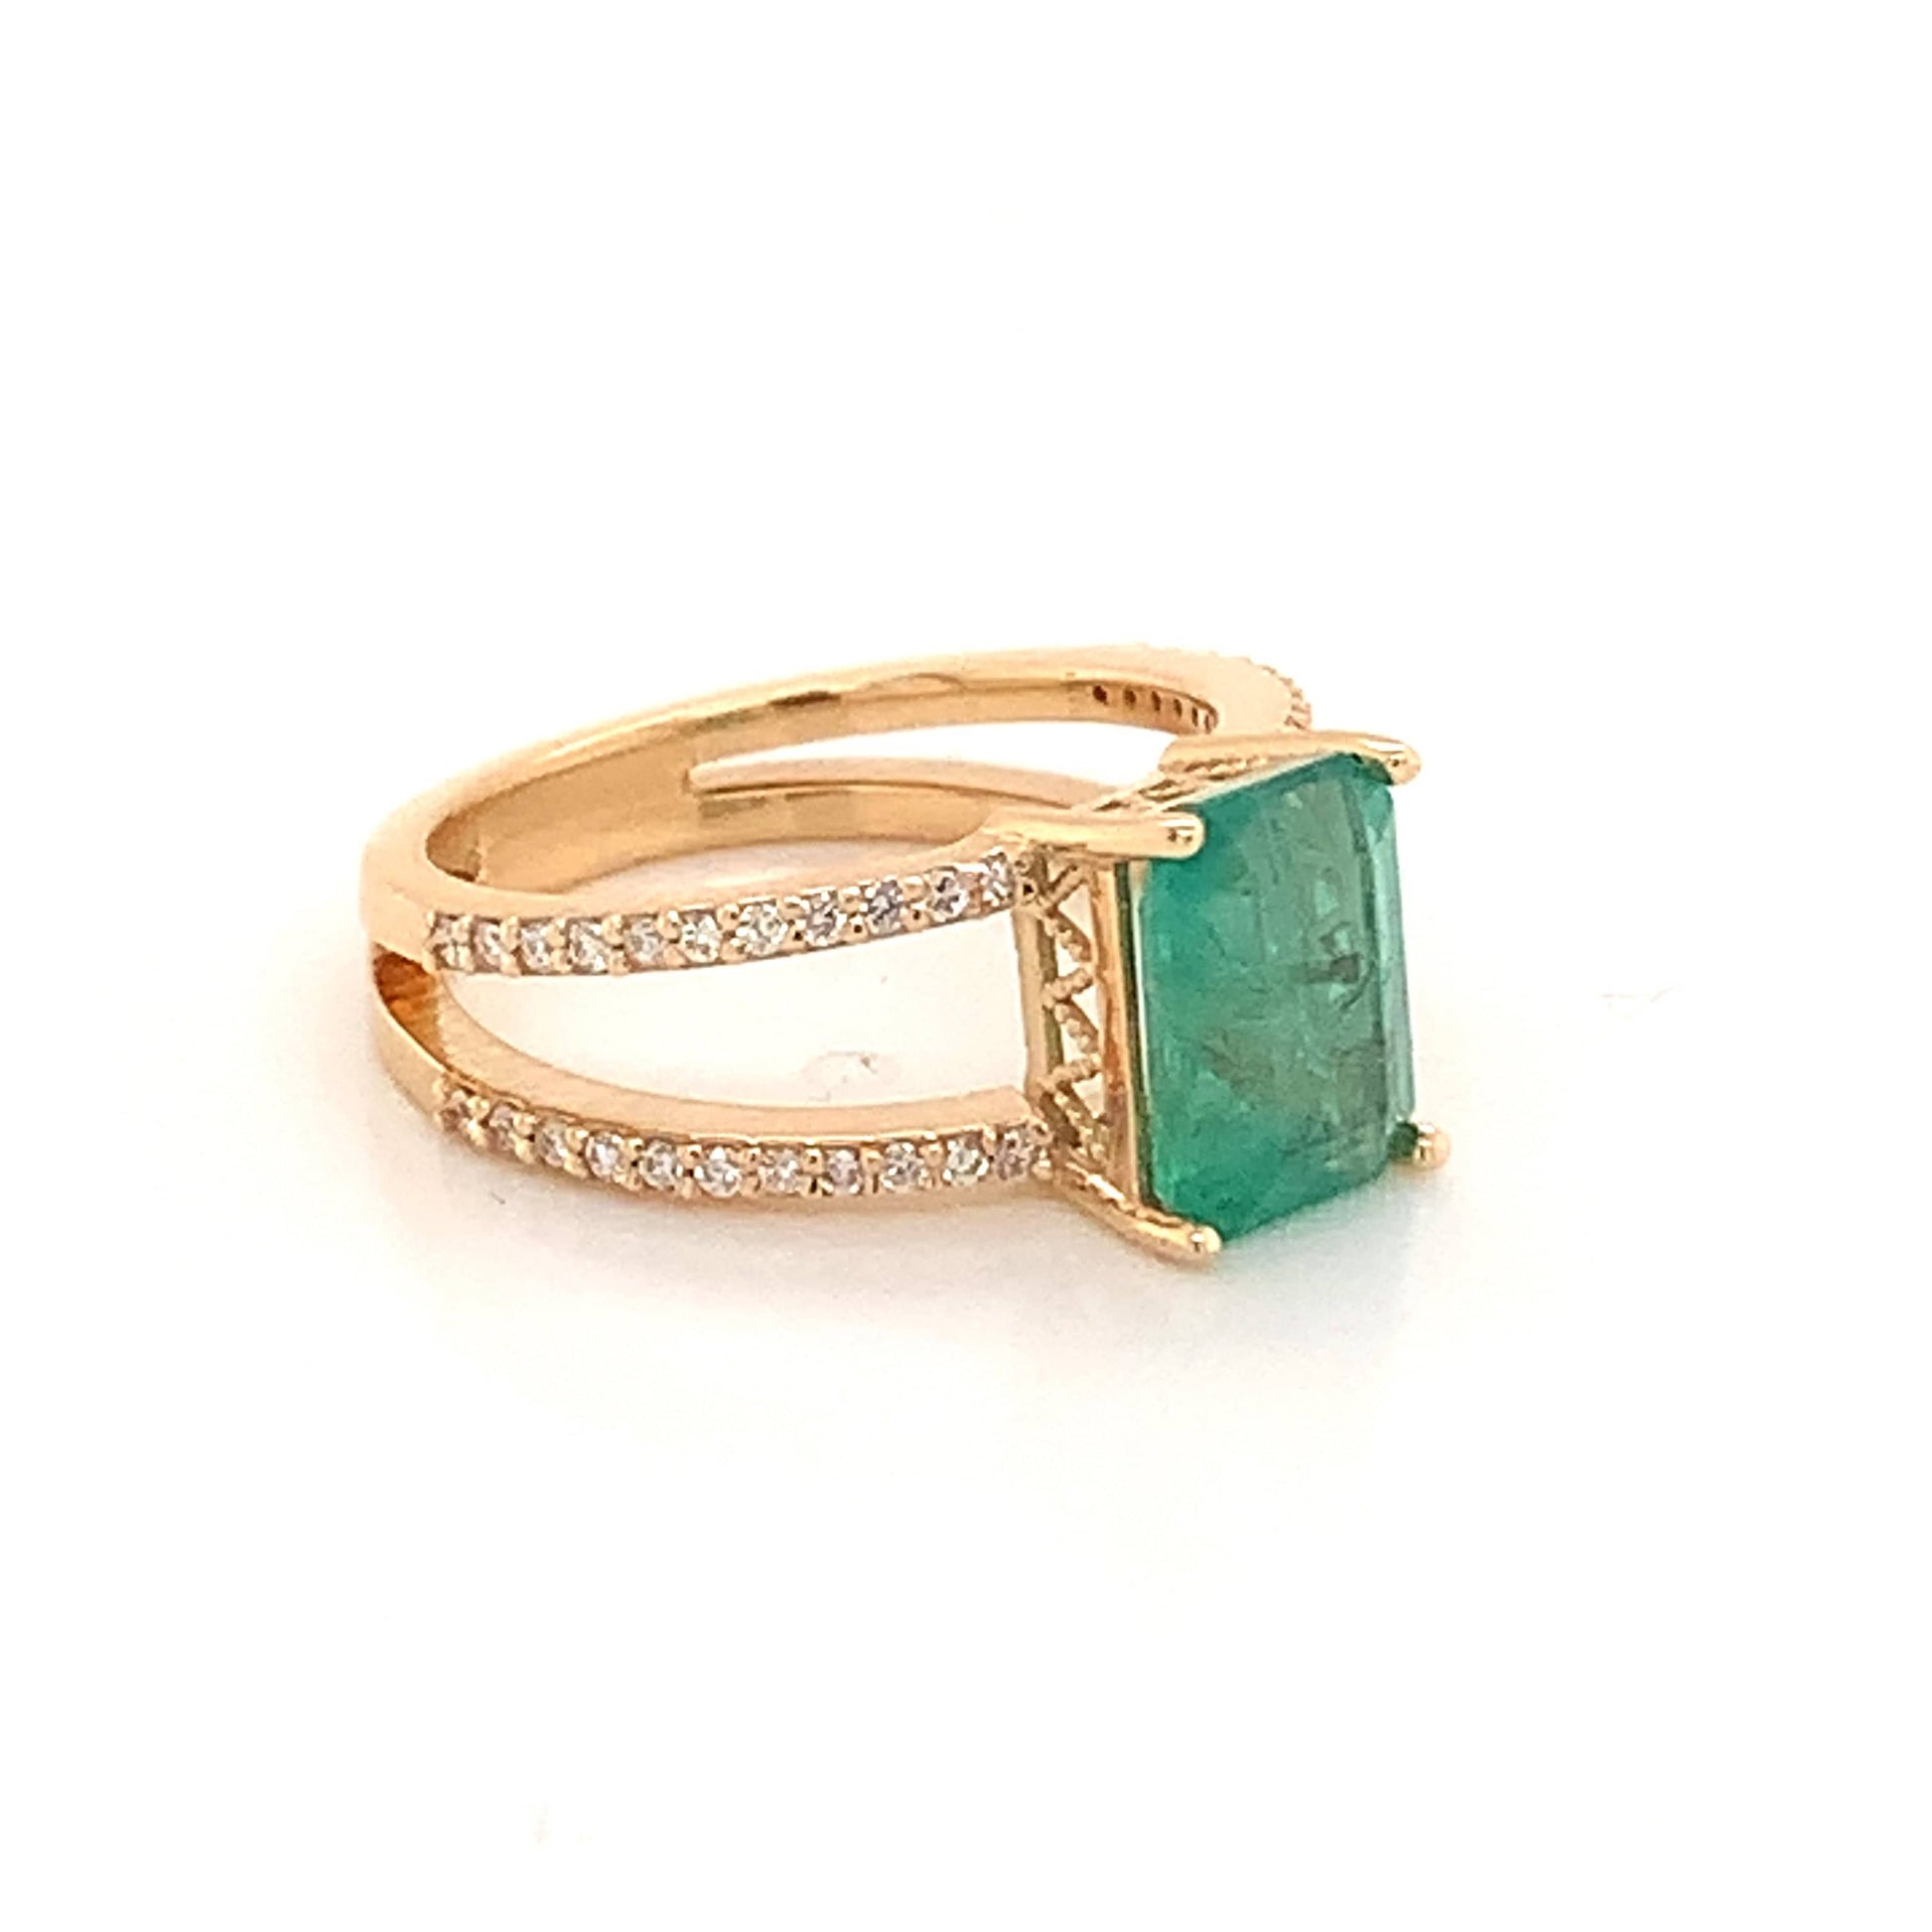 Natural Emerald Diamond Ring 14k Gold 2.32 TCW Size 7 Certified $5,950 111874 - Certified Estate Jewelry